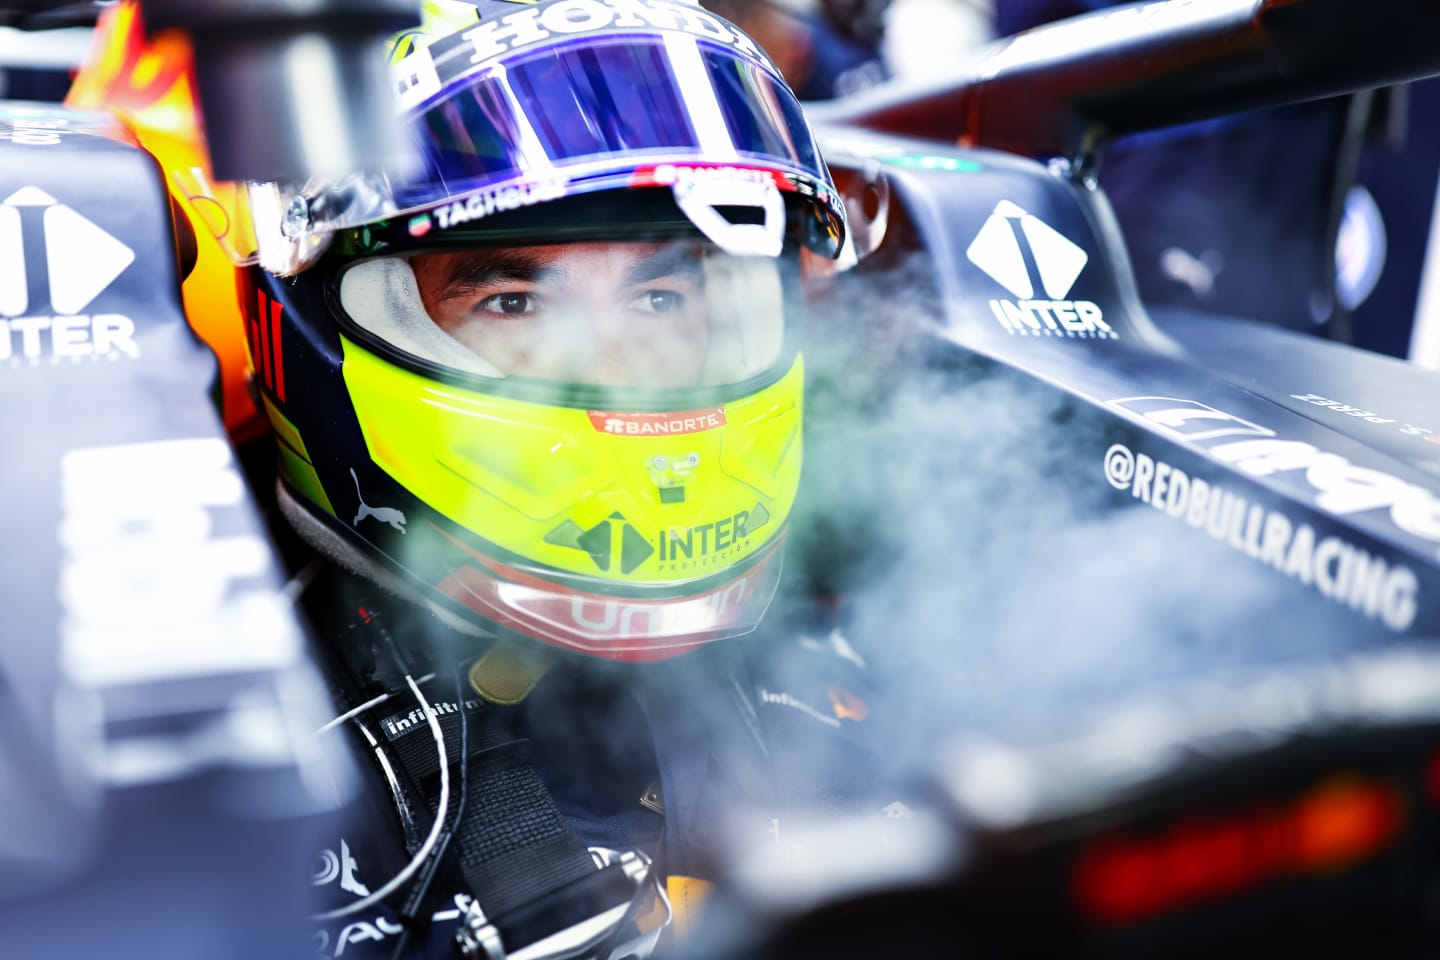 ABU DHABI, UNITED ARAB EMIRATES - DECEMBER 10: Sergio Perez of Mexico and Red Bull Racing prepares to drive in the garage during practice ahead of the F1 Grand Prix of Abu Dhabi at Yas Marina Circuit on December 10, 2021 in Abu Dhabi, United Arab Emirates. (Photo by Mark Thompson/Getty Images)